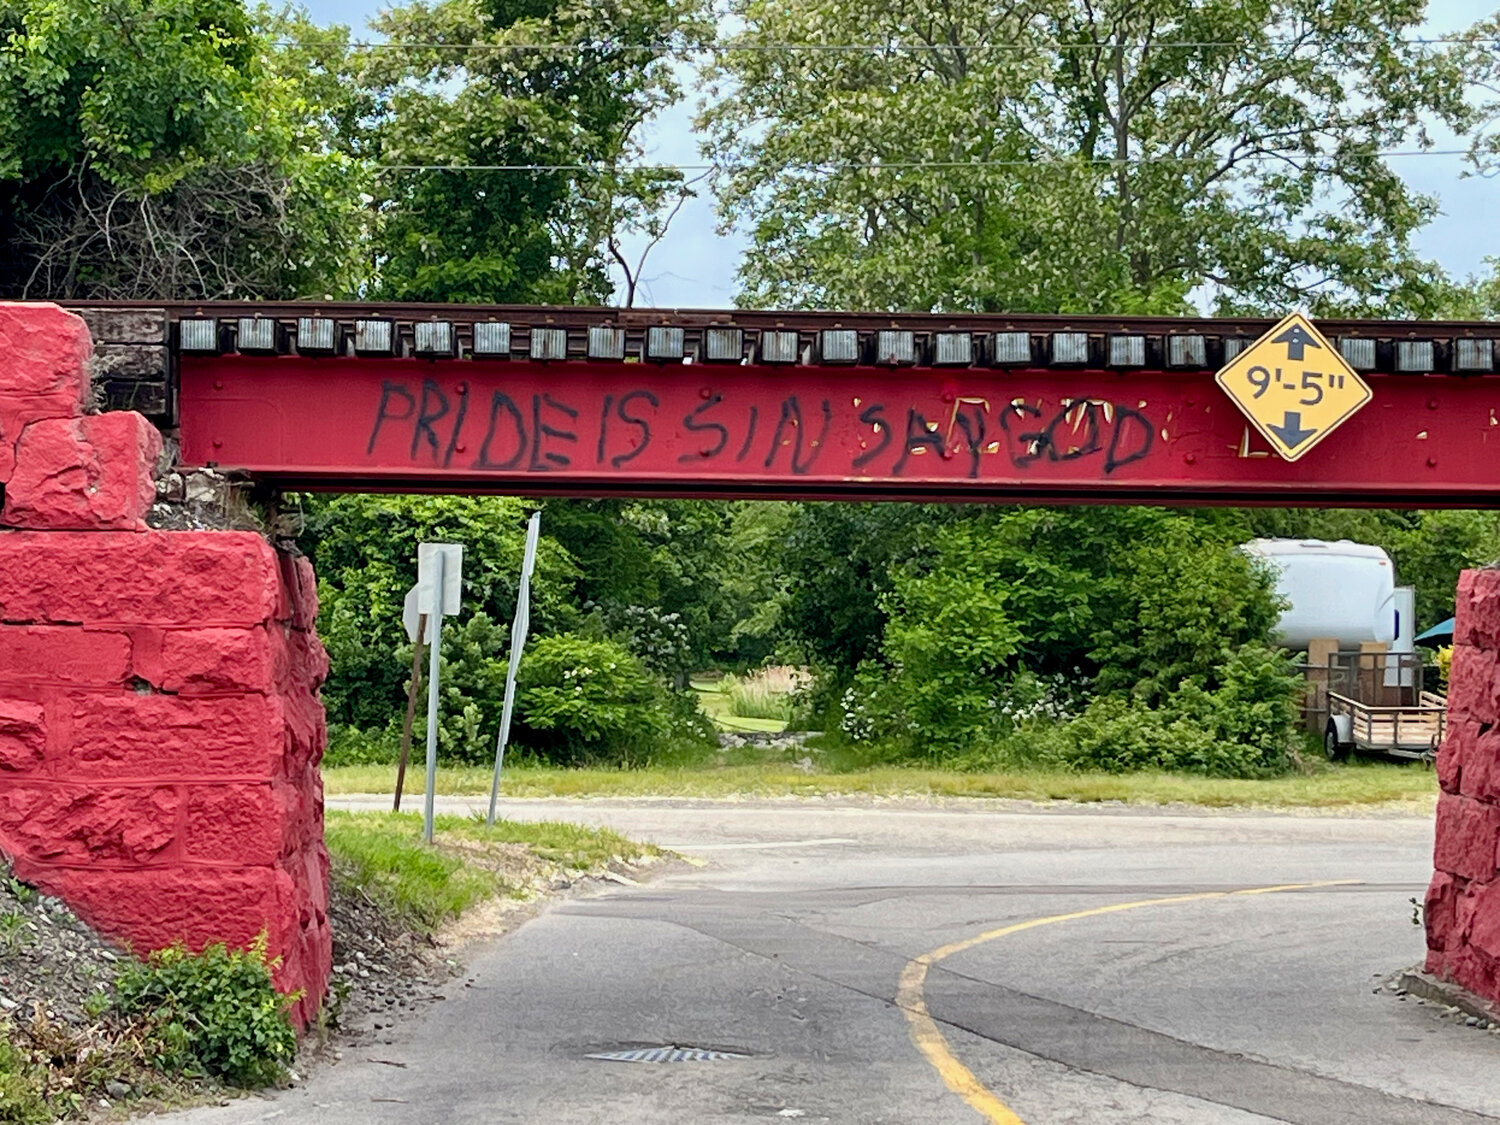 The railroad bridge entrance to Common Fence Point was struck with this graffiti just hours before a Pride Market fund-raiser was held in the neighborhood on Saturday. It has since been painted over.